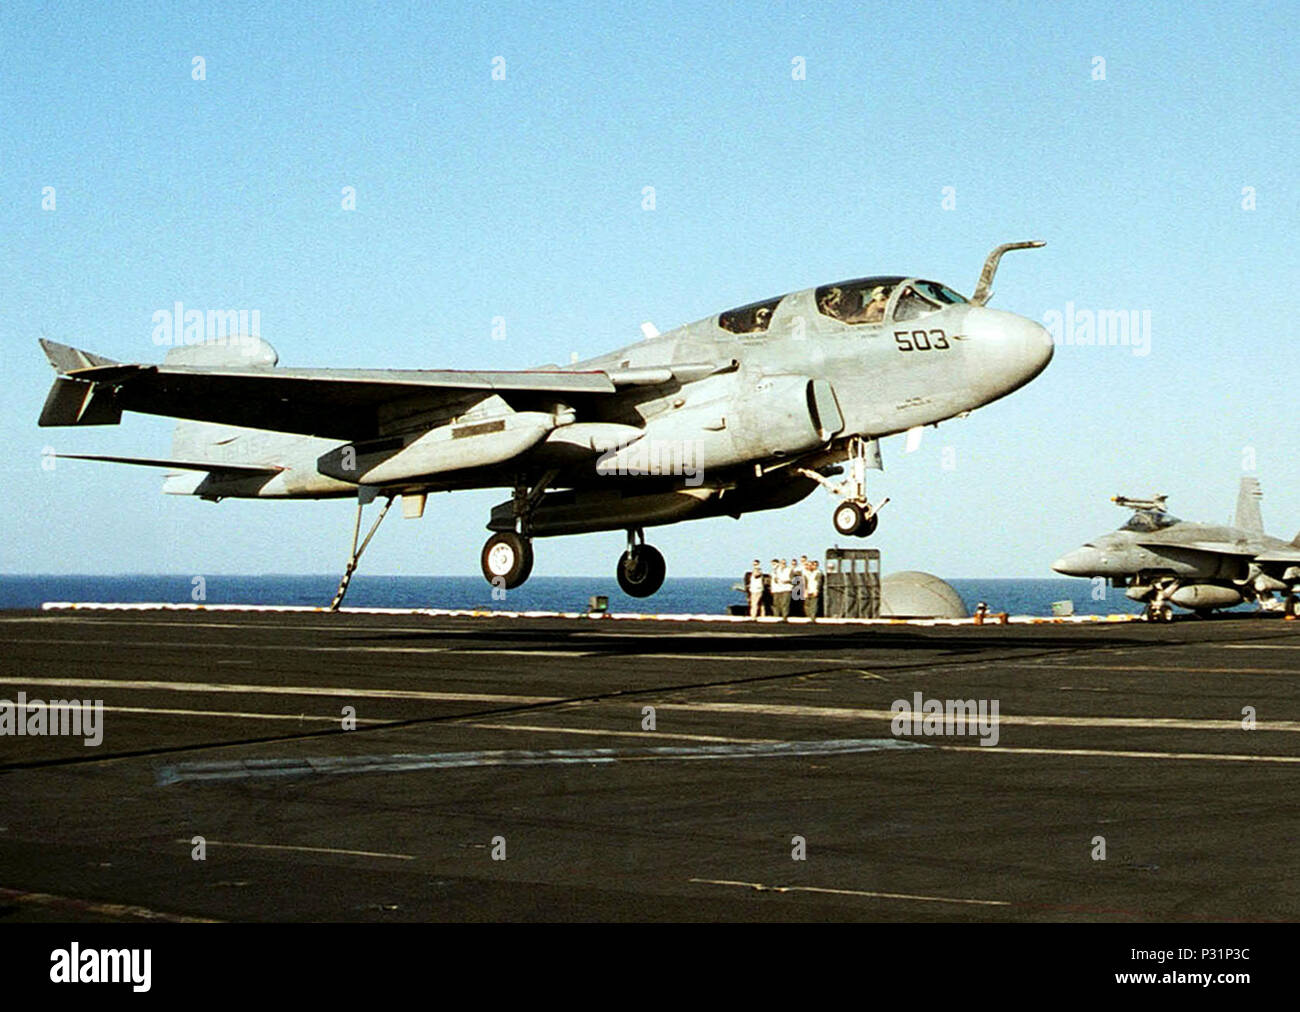 sea aboard USS Theodore Roosevelt (CVN 71) Dec. 19, 2001 -- Commander Gary 'Norm' Peterson's EA-6B Prowler jet heads for the number one arresting gear wire for his 1,000th Trap as a Naval Aviator.  Cdr. Peterson's milestone occurred aboard USS Theodore Roosevelt while deployed in support Operation Enduring Freedom.  Peterson is presently the Commanding Officer of Tactical Electronic Warfare Squadron One Three Seven (VAQ-137) which is part of Carrier Air Wing One (CVW 1) deployed with the Roosevelt. Stock Photo